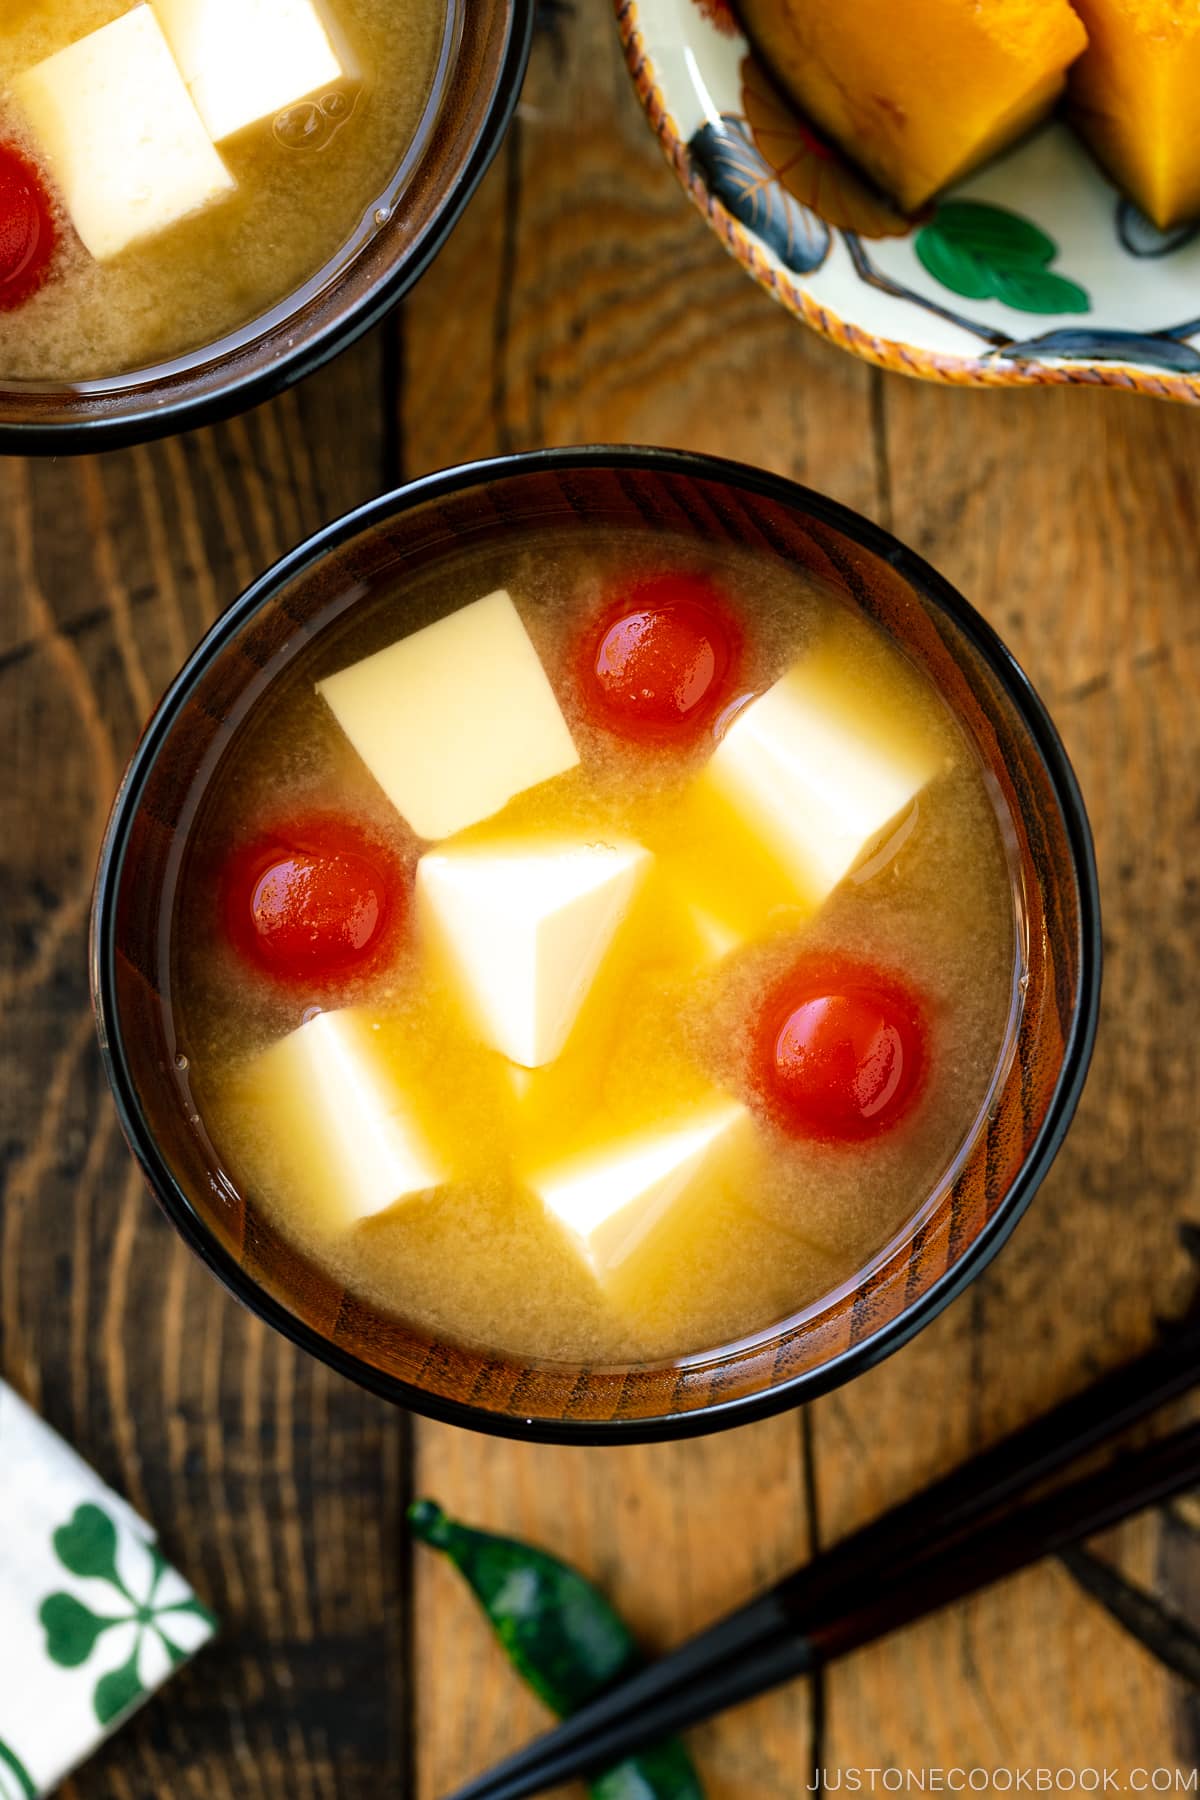 A Japanese wooden bowl containing Tomato and Tofu Miso Soup.